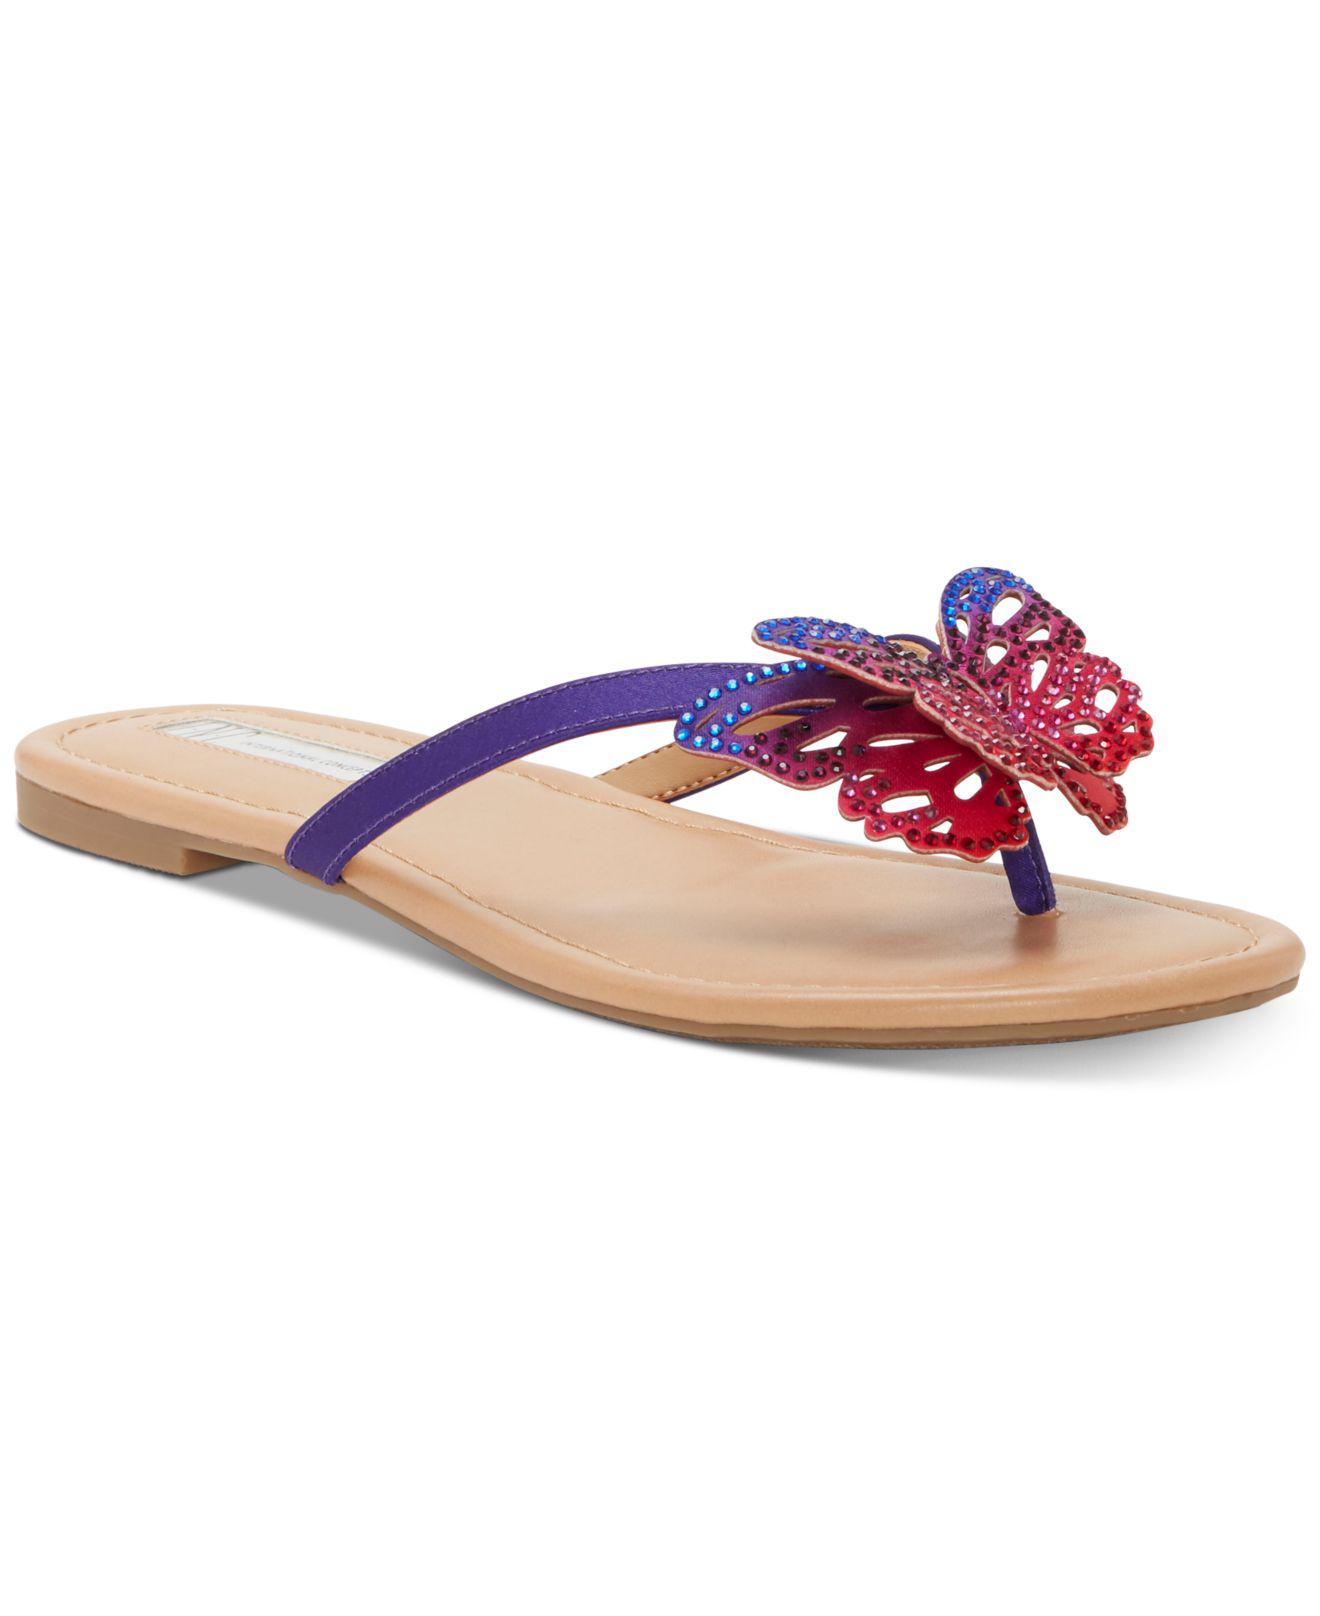 INC International Concepts Marsha Butterfly Flip-flop Sandals, Created ...